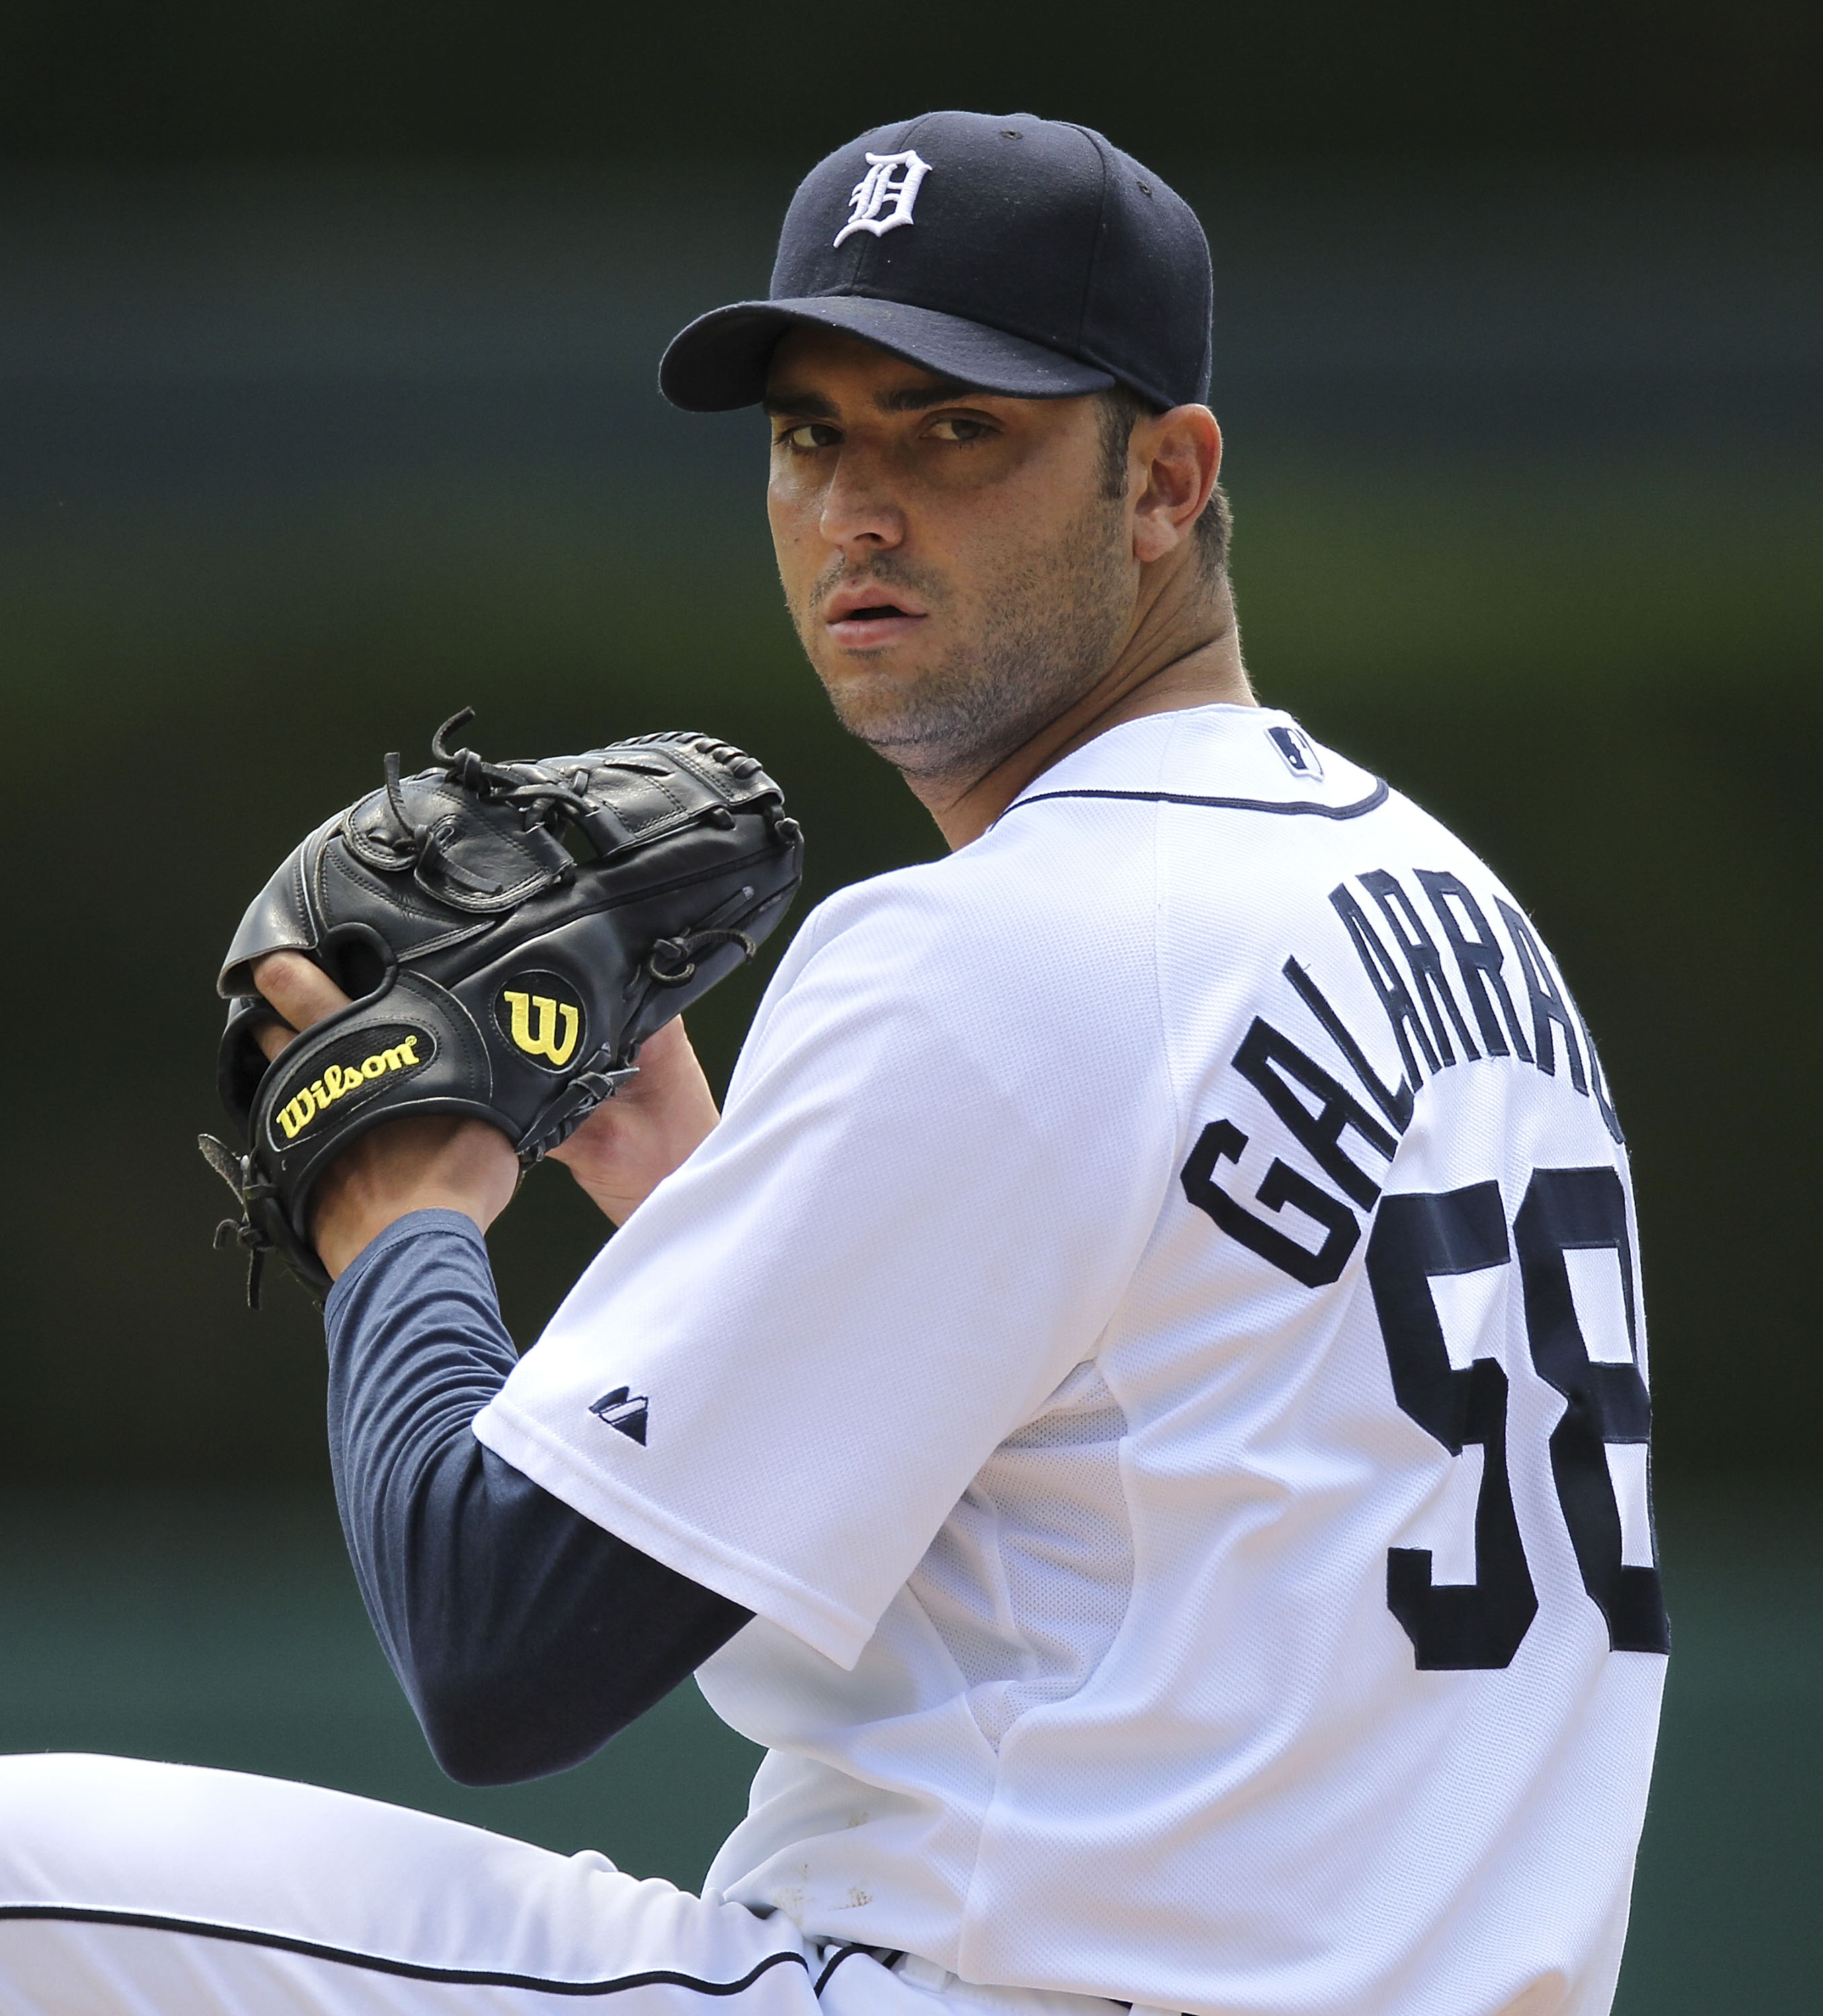 DETROIT - JULY 25: Armando Galarraga #58 of the Detroit Tigers warms up prior to the start of the first inning against the  Toronto Blue Jays on July 25, 2010 at Comerica Park in Detroit, Michigan. The Blue Jays defeated the Tigers 5-3.  (Photo by Leon Ha